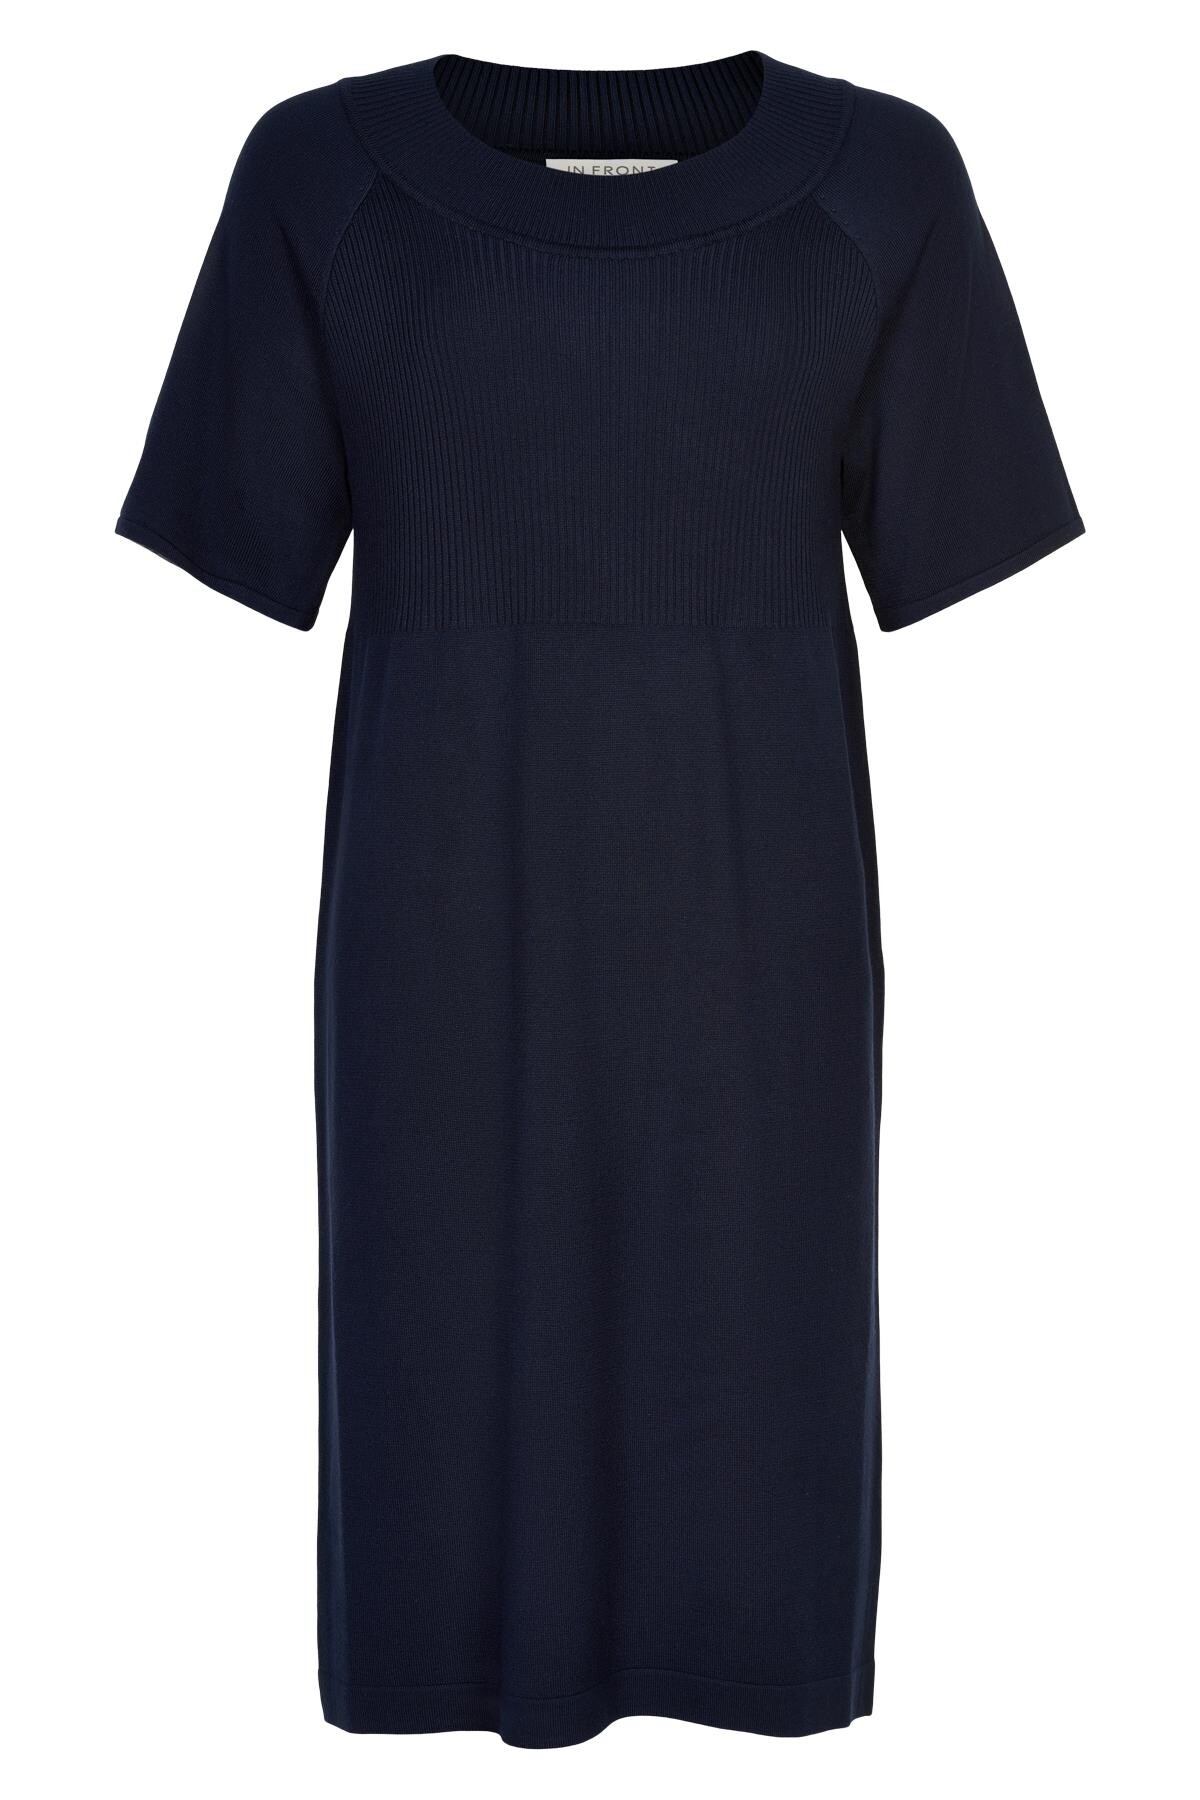 IN FRONT CAMILLE KNIT DRESS 14921 591 (Navy 591)